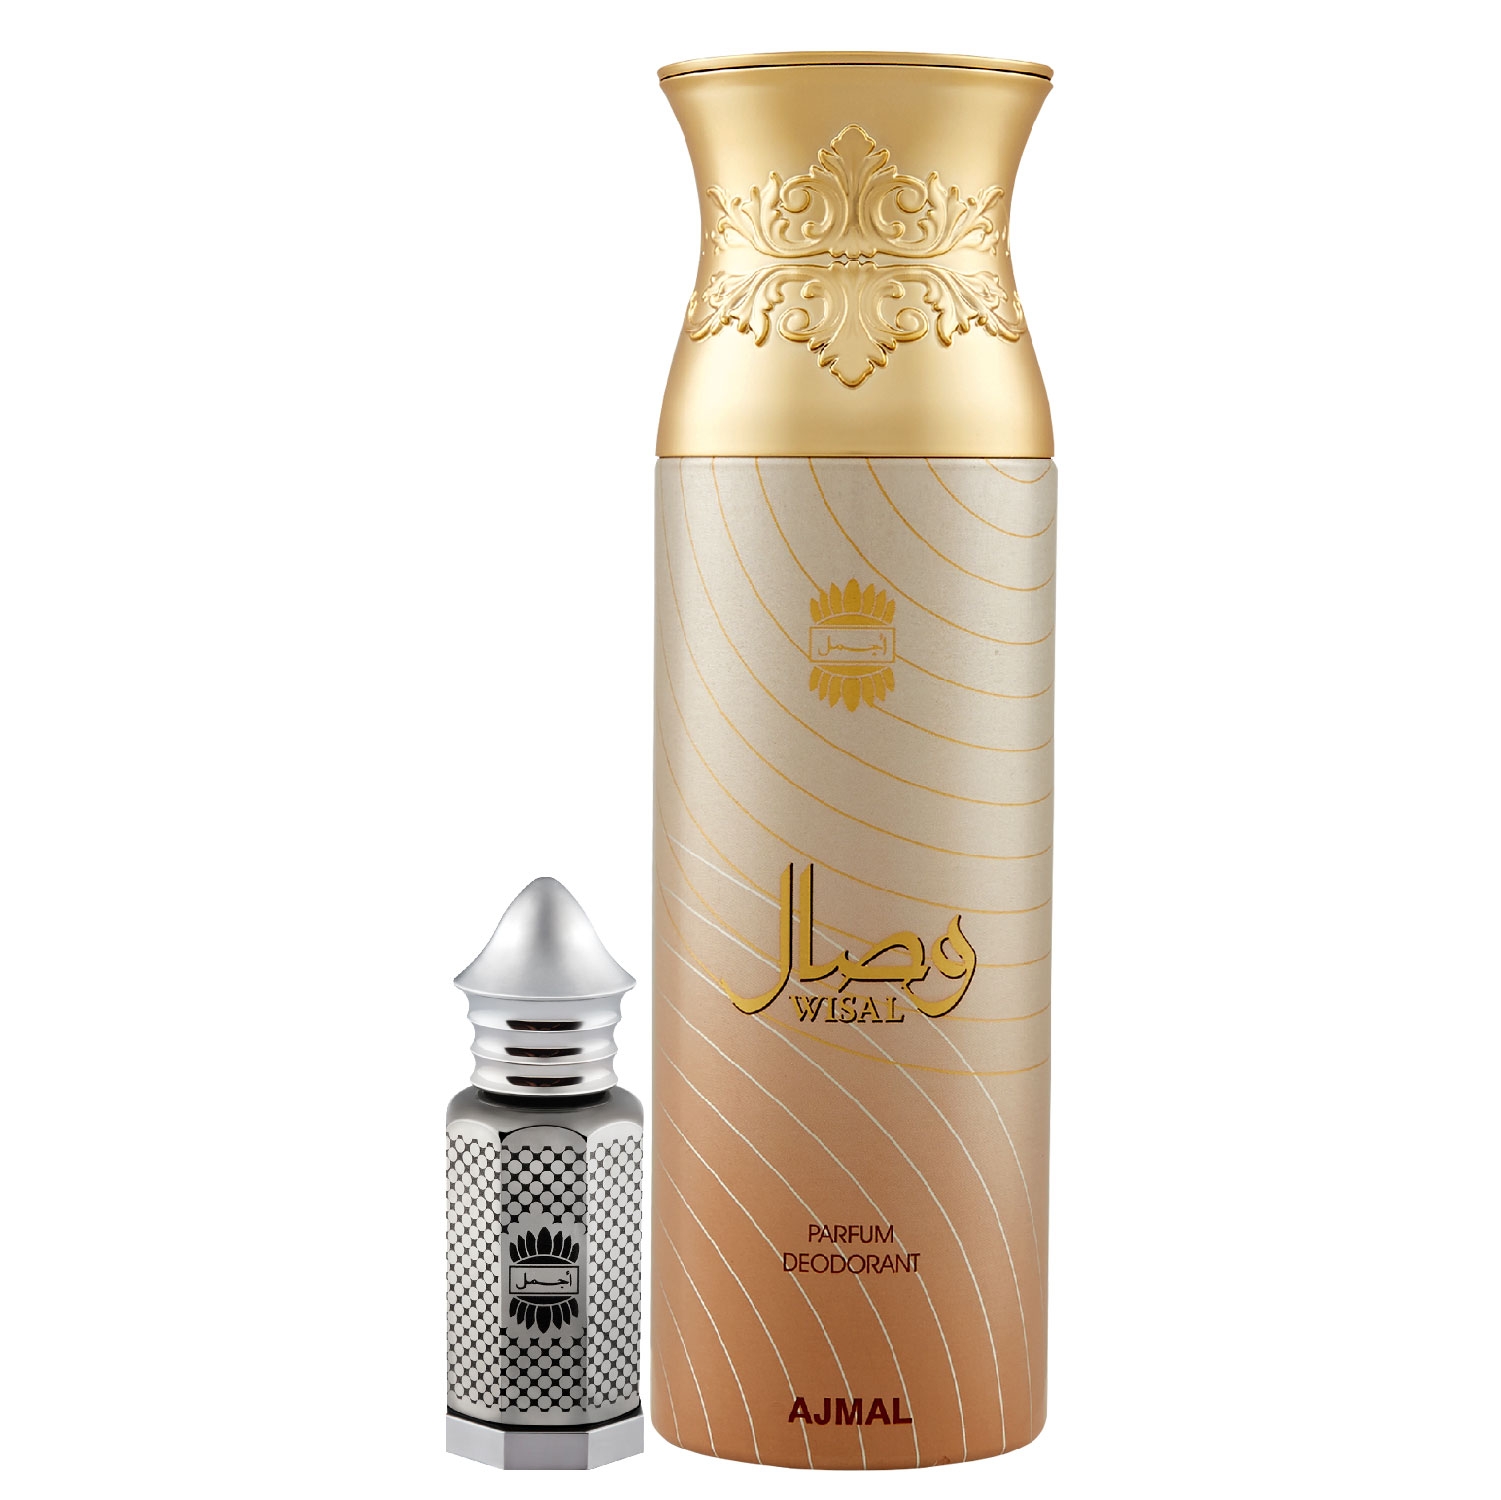 Ajmal | Ajmal Asher Concentrated Perfume Oil Oriental Alcohol-free Attar 12ml for Unisex and Wisal Deodorant Floral Musky Fragrance 200ml for Women + 2 Parfum Testers FREE